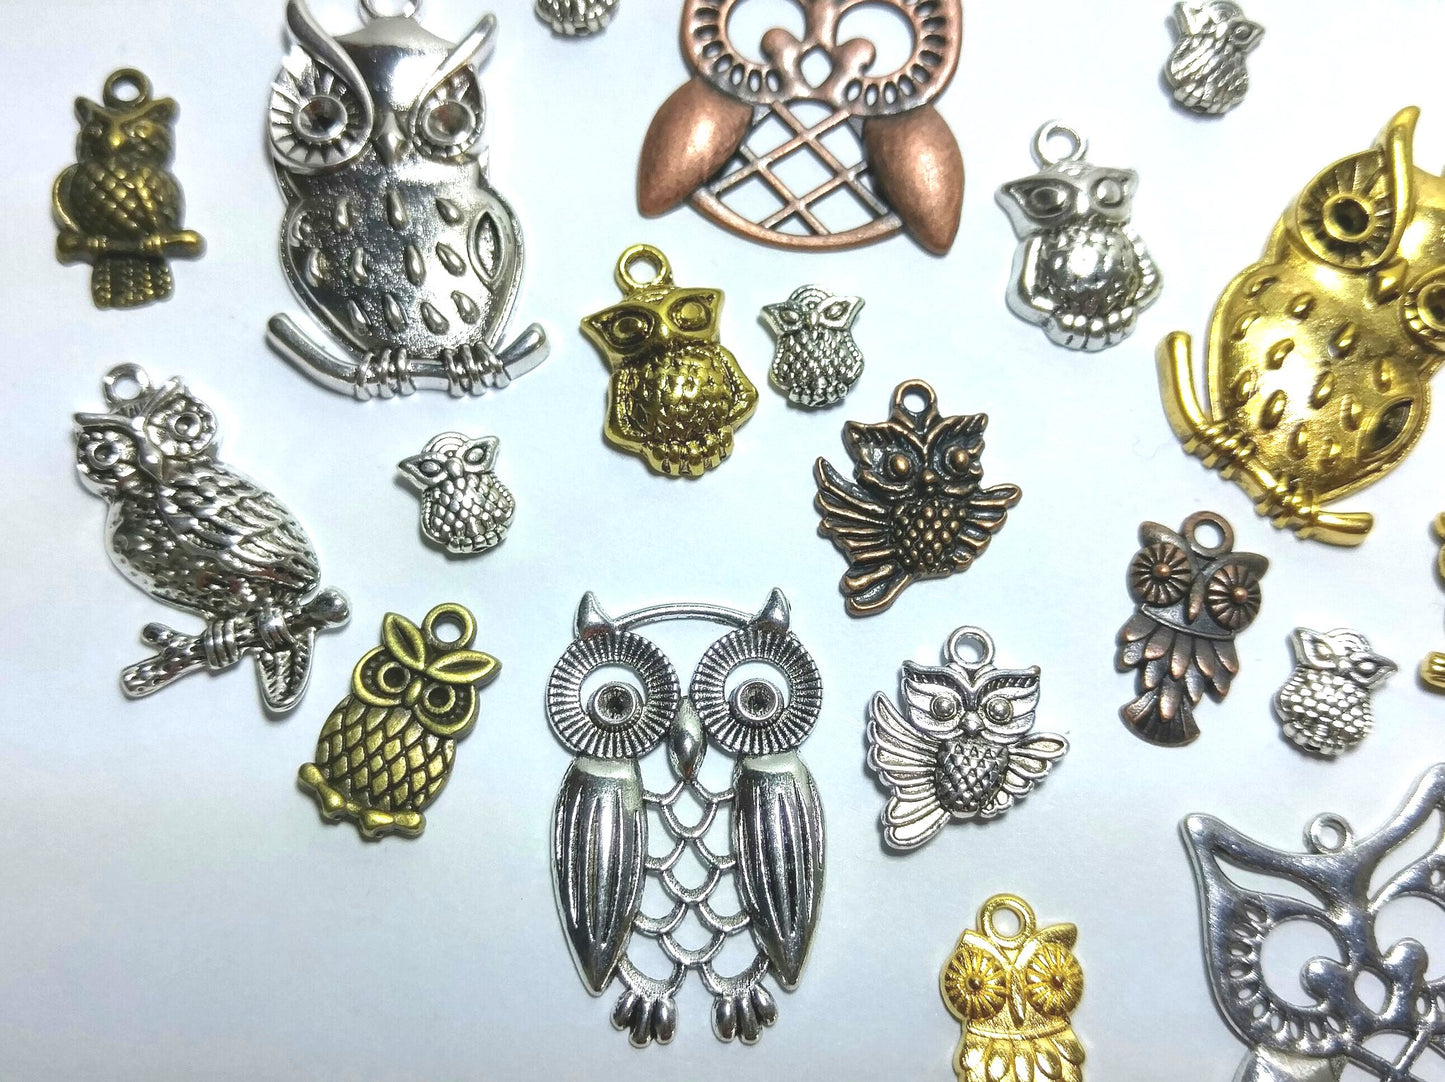 20 Owl Charms/Beads Mix